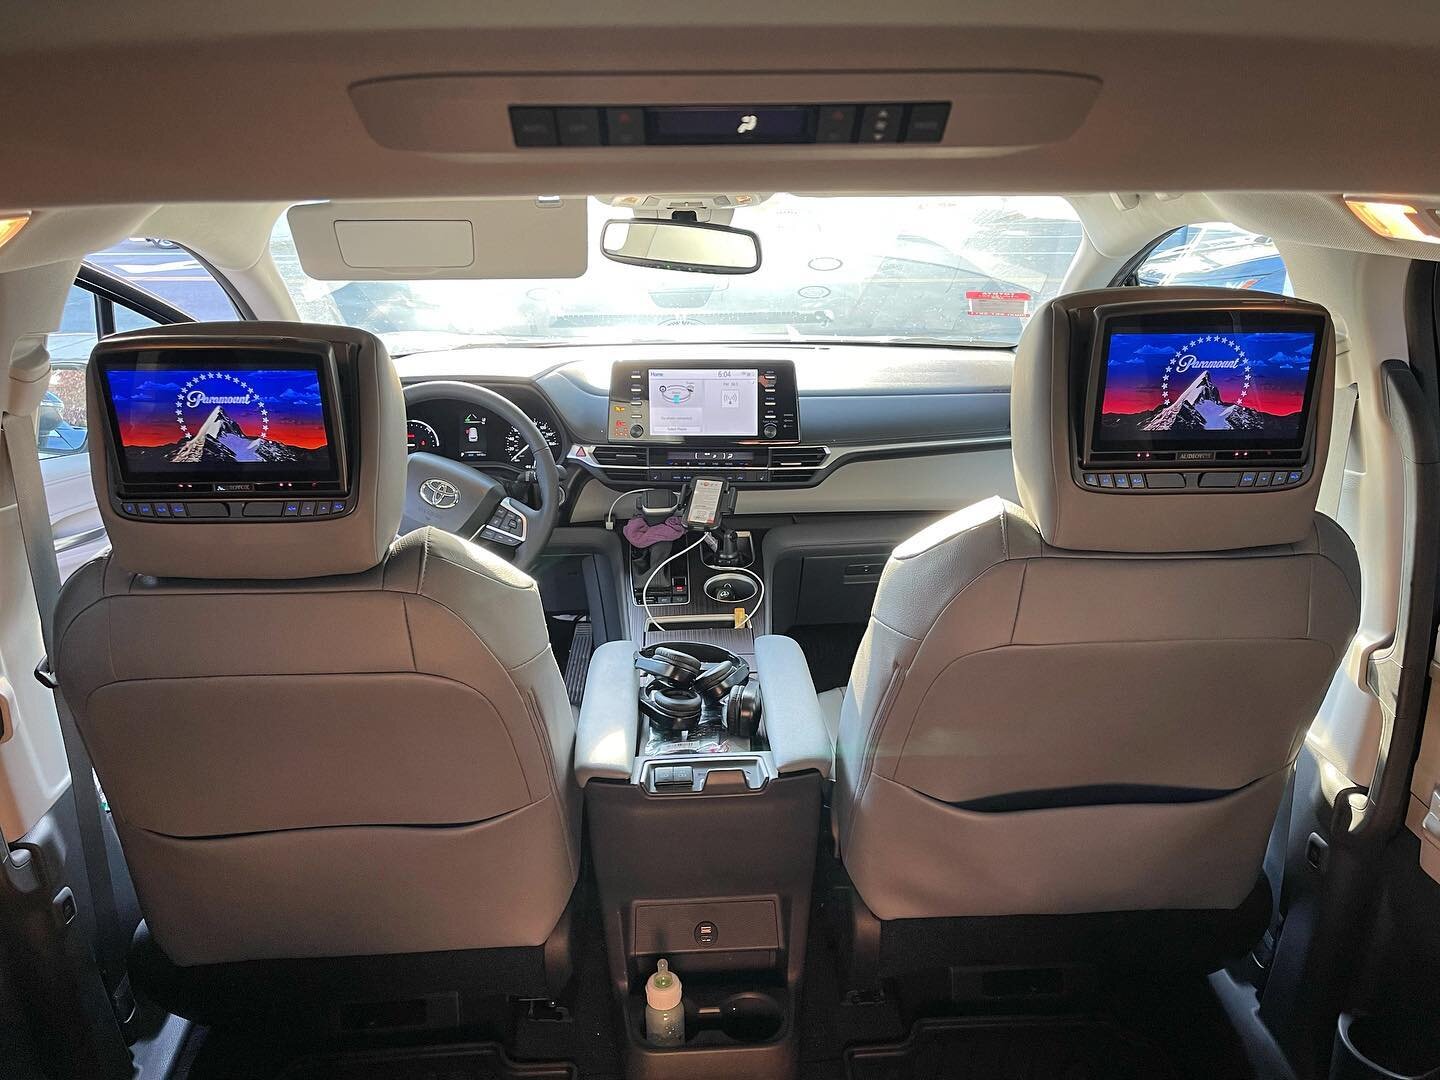 2023 Toyota Sienna with Audiovox Dual DVD headrest monitors. Perfect to keep those little ones occupied on long road trips!
.
.
.
#toyota#sienna#caraudio#audiovox